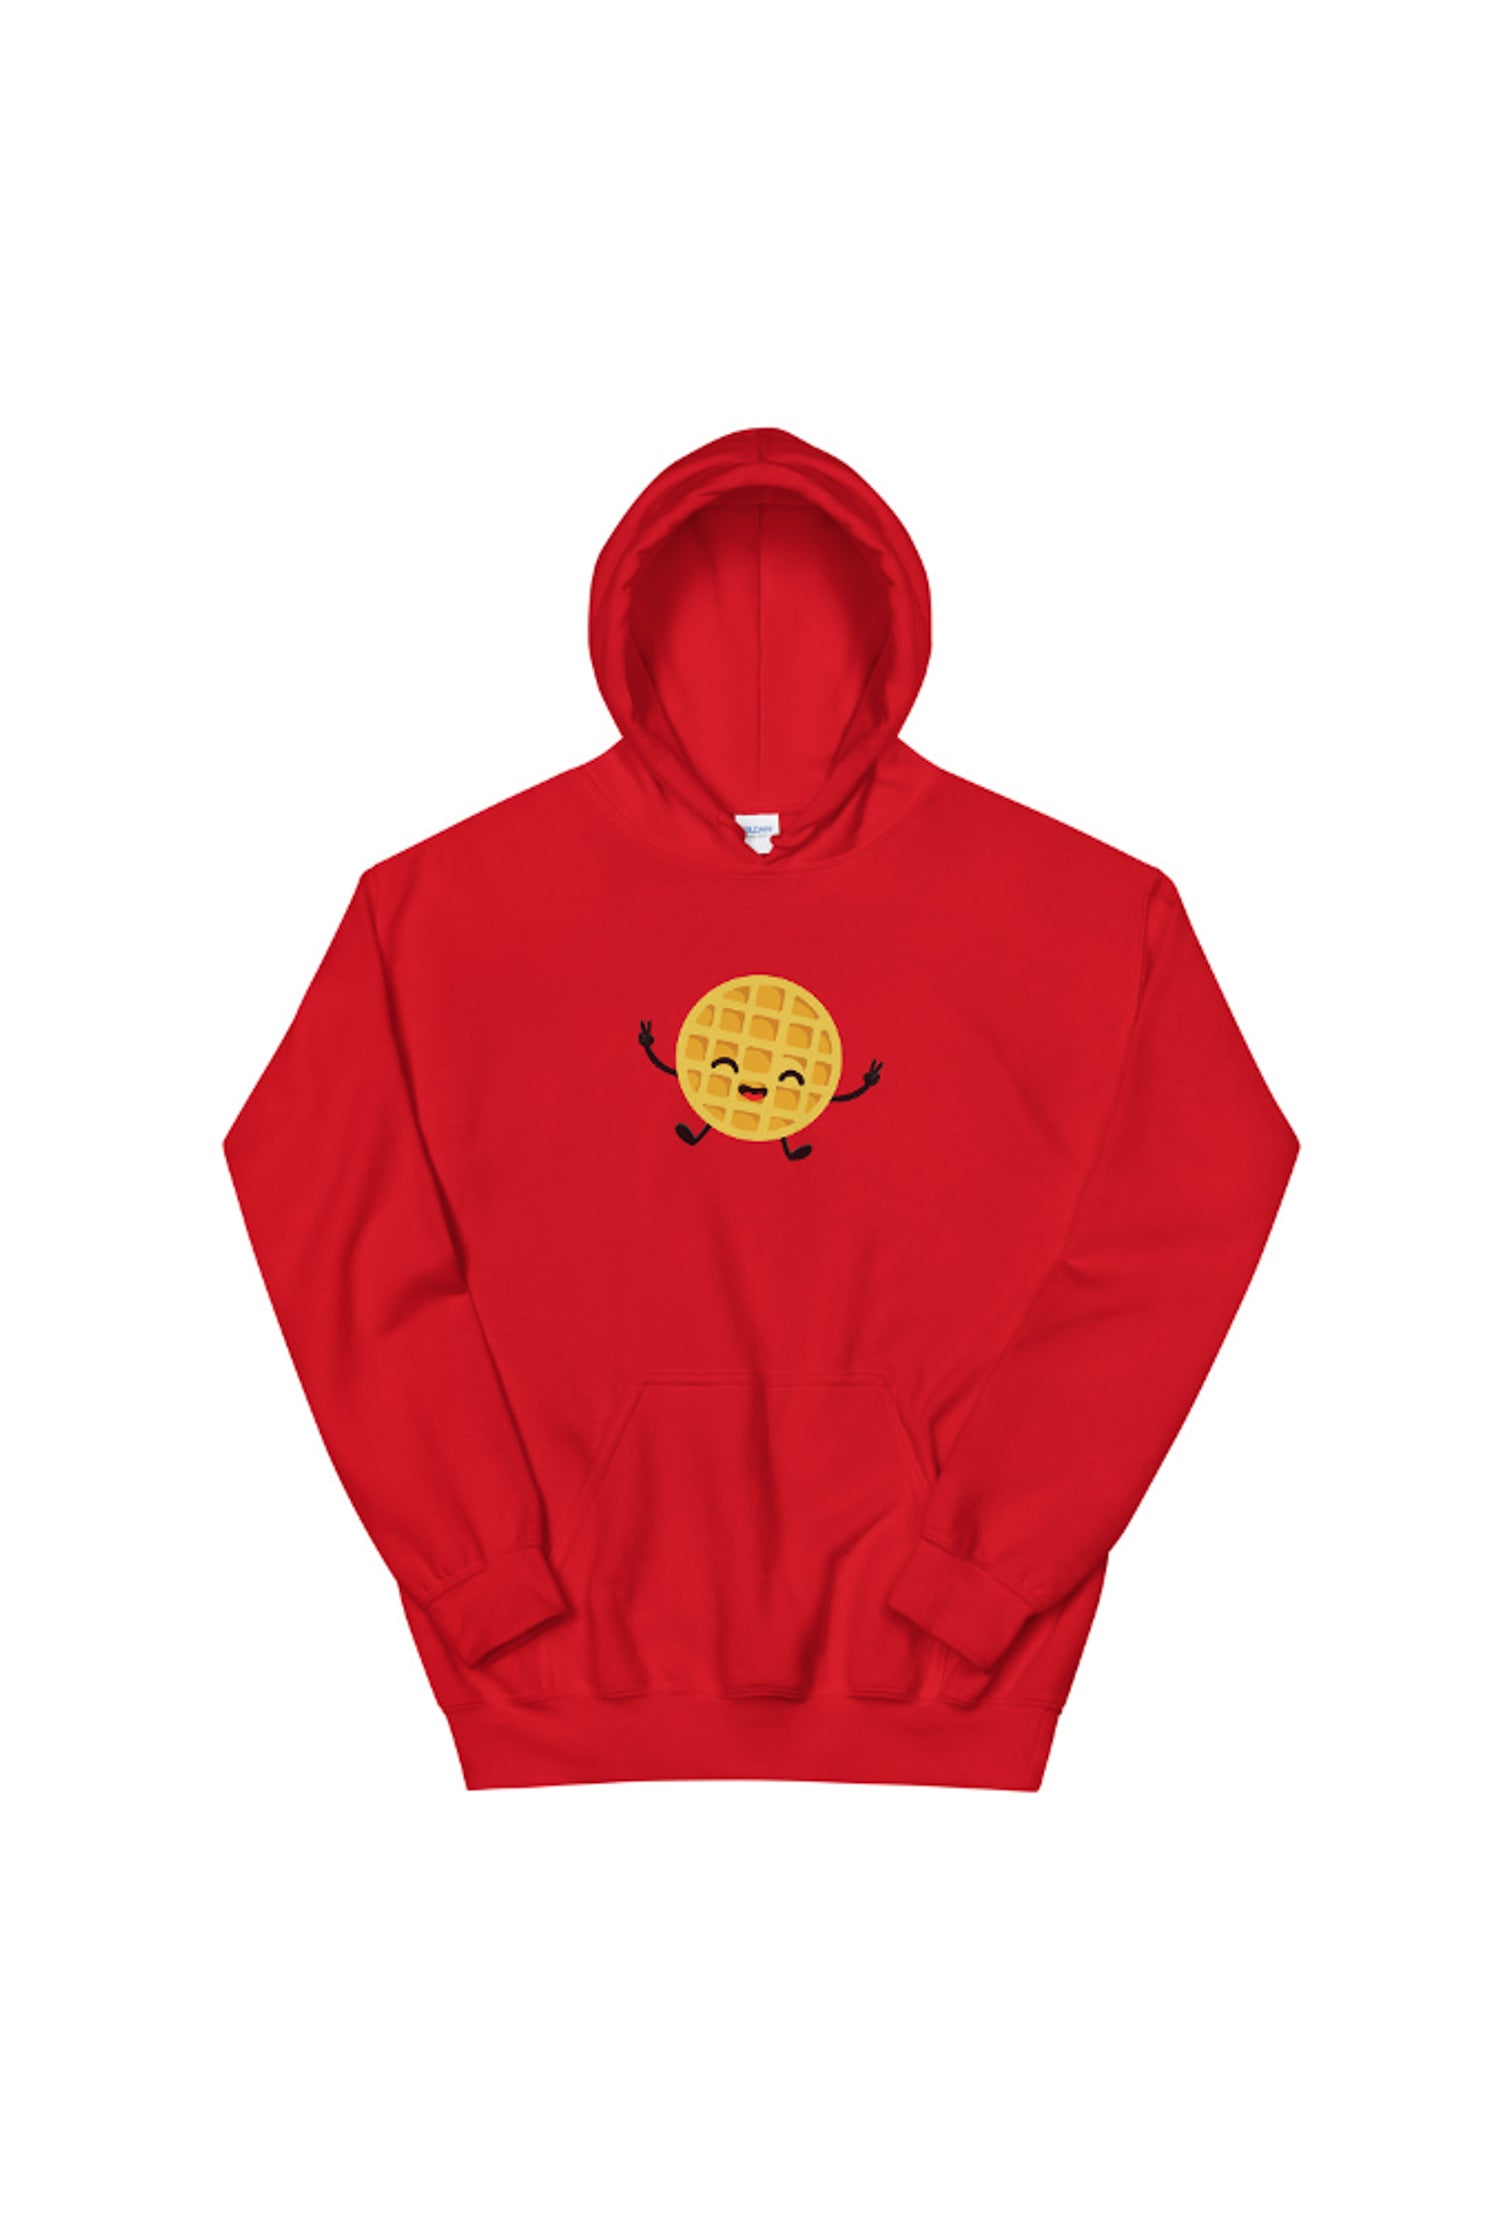 Waffle Nation Hoodie - Red